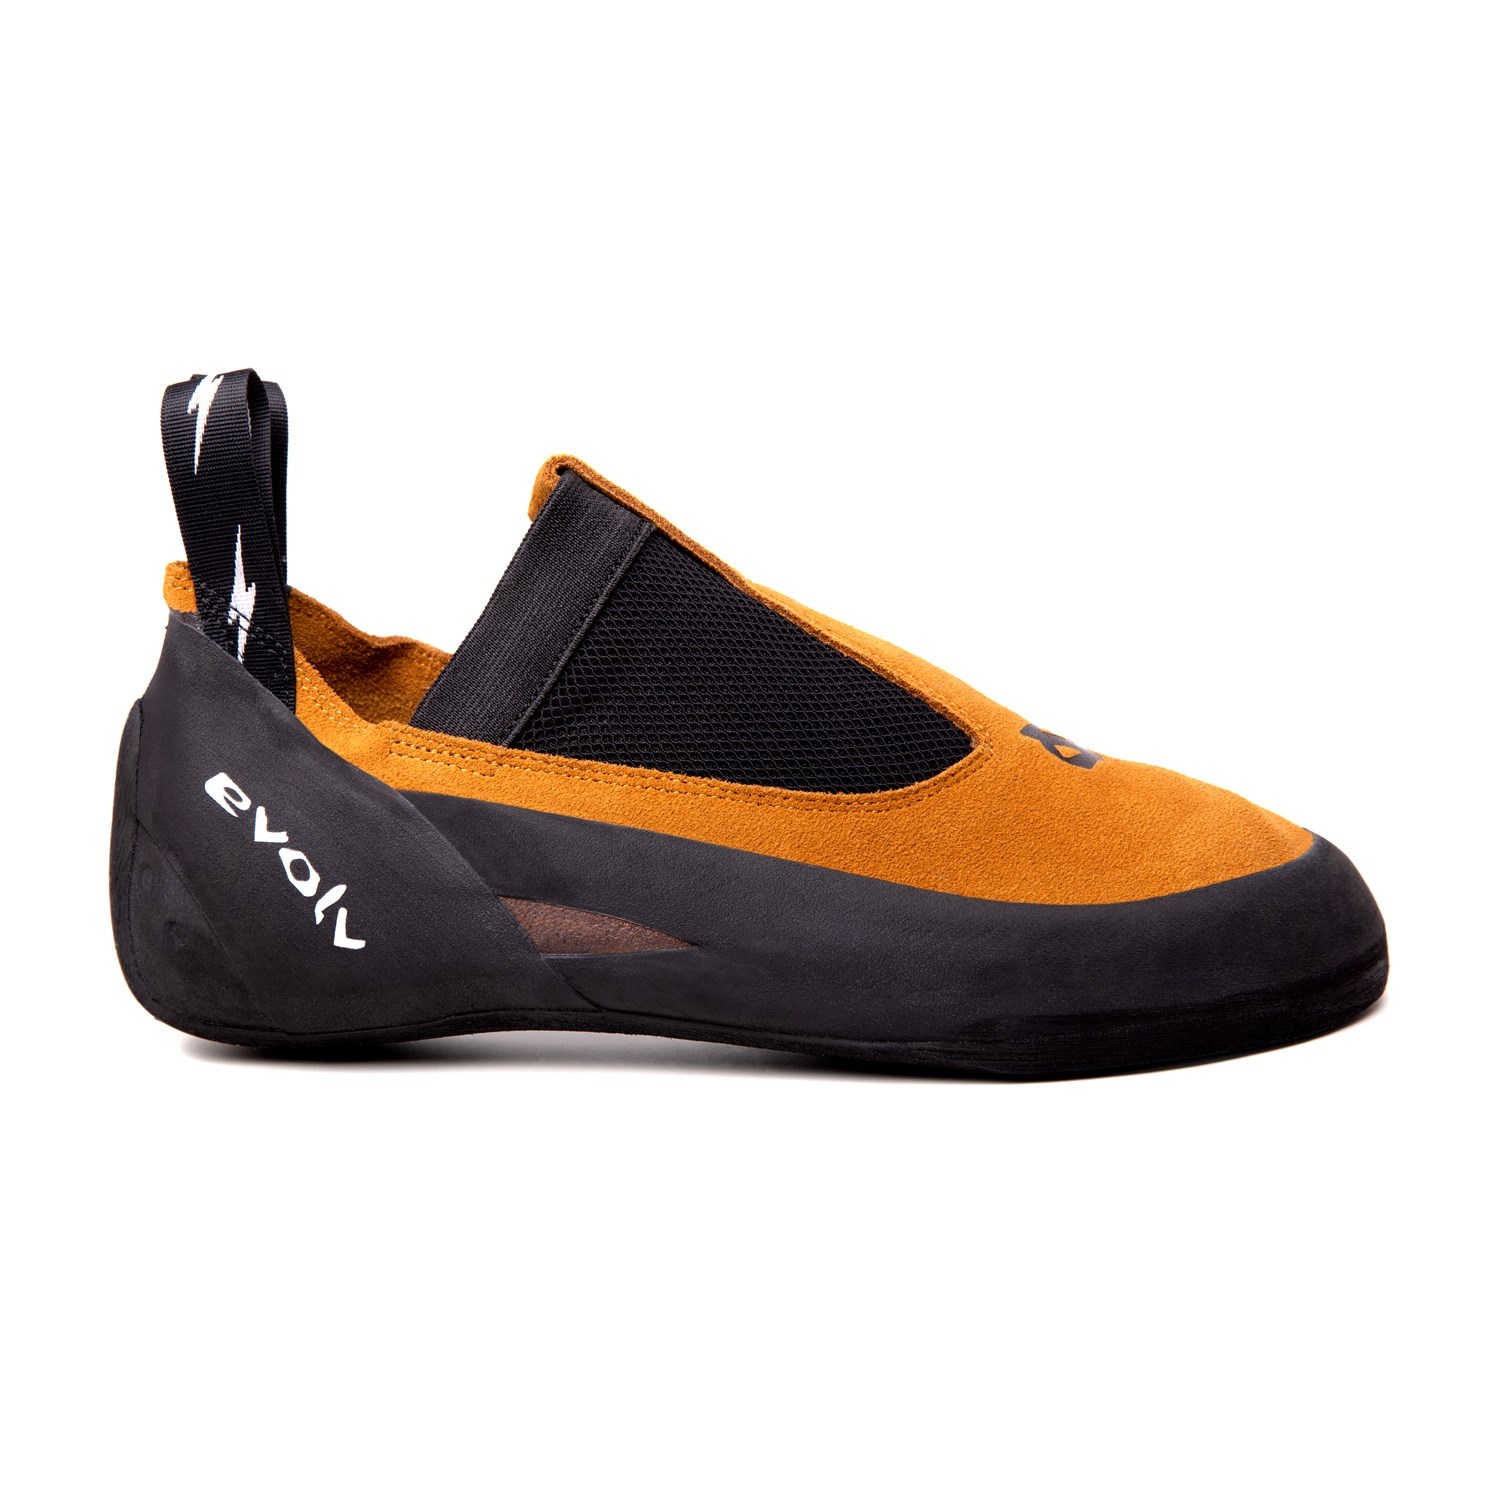 Rave - Performance Climbing Shoes |